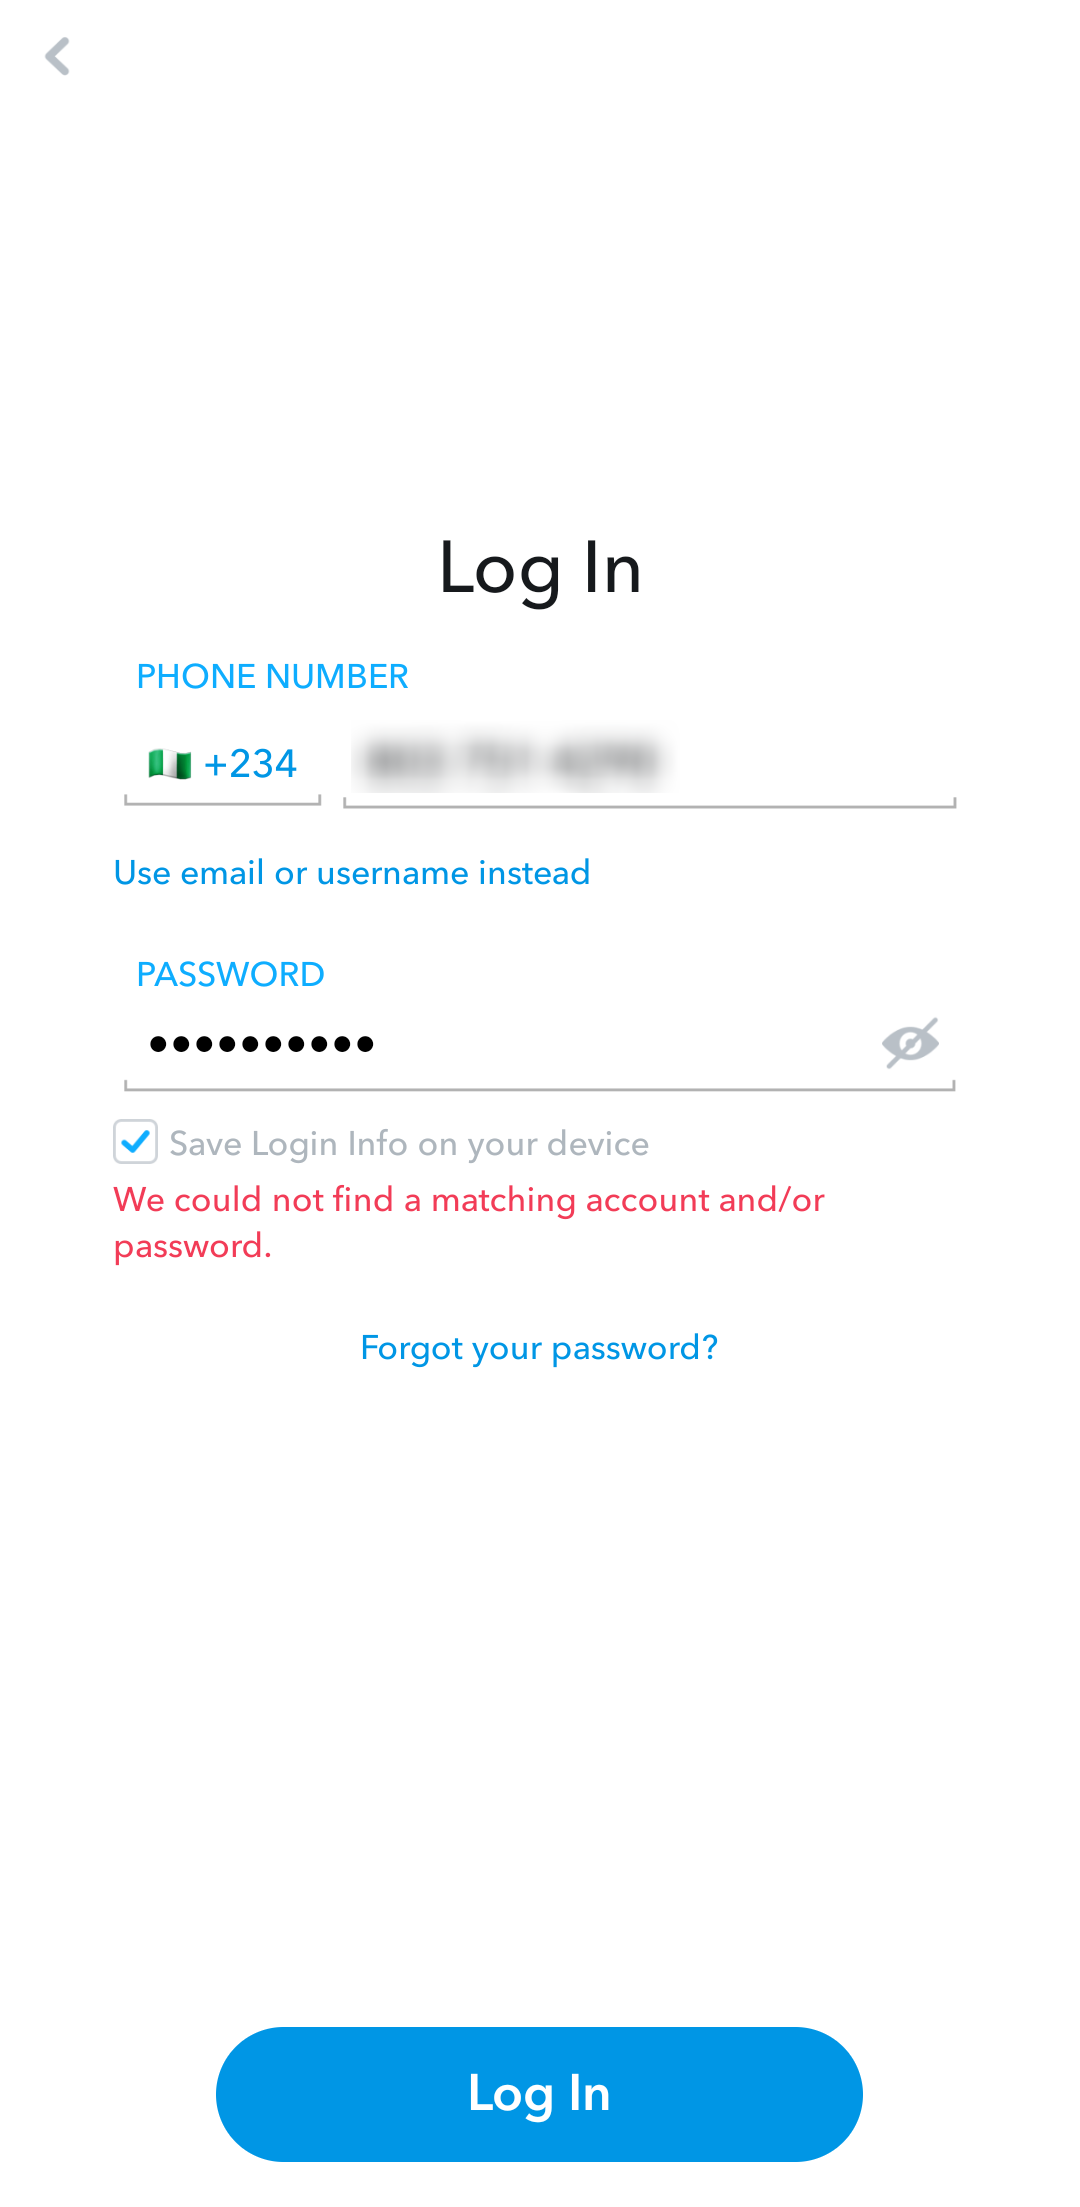 Failed Snapchat account reactivation with phone number